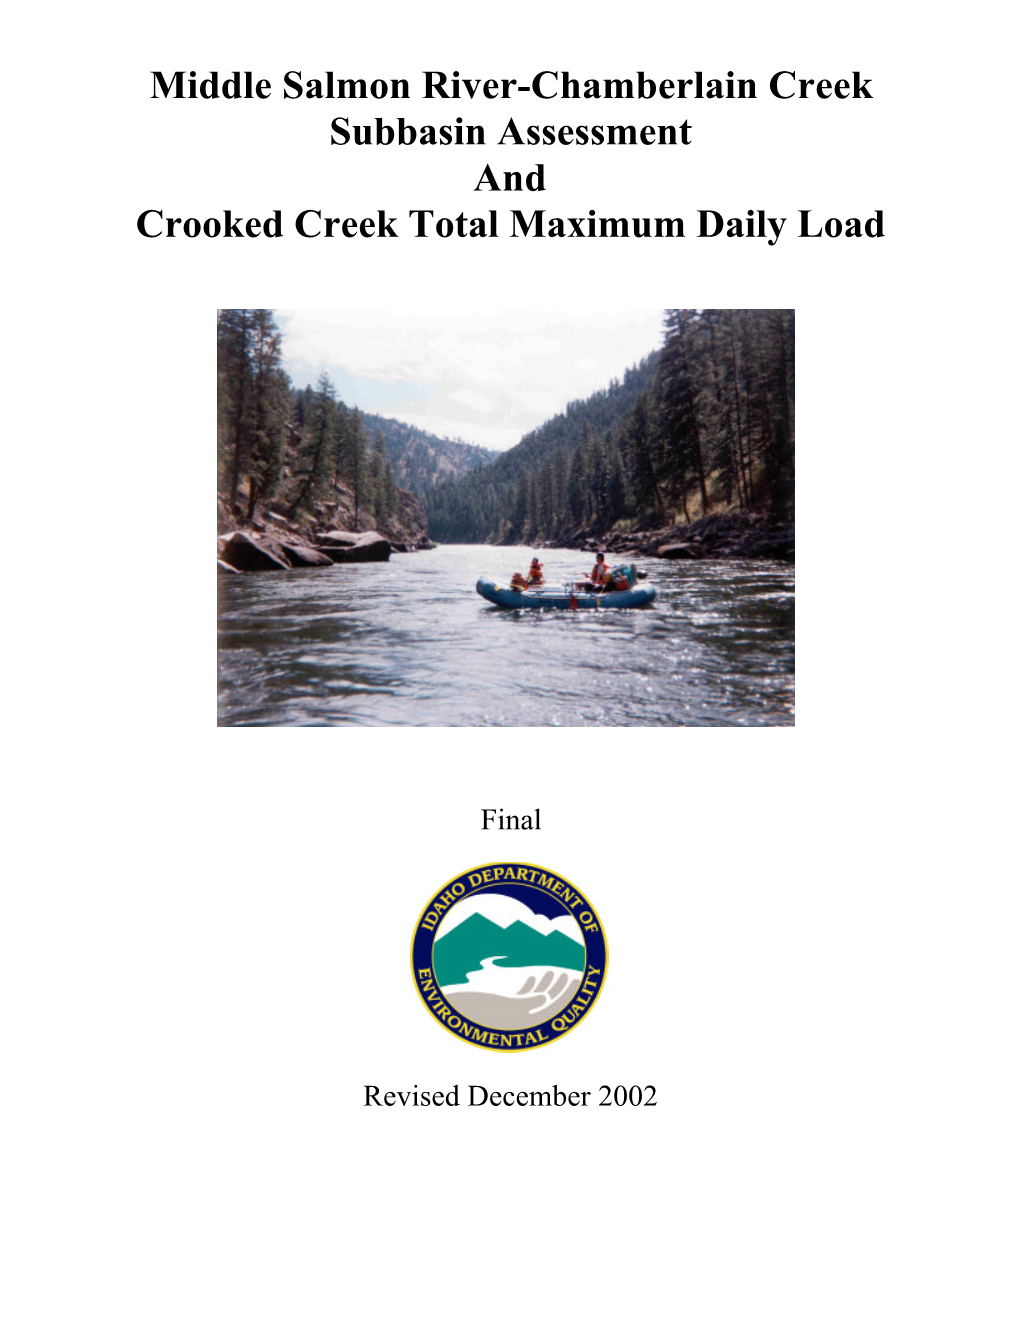 Middle Salmon River-Chamberlain Creek Subbasin Assessment and Crooked Creek Total Maximum Daily Load